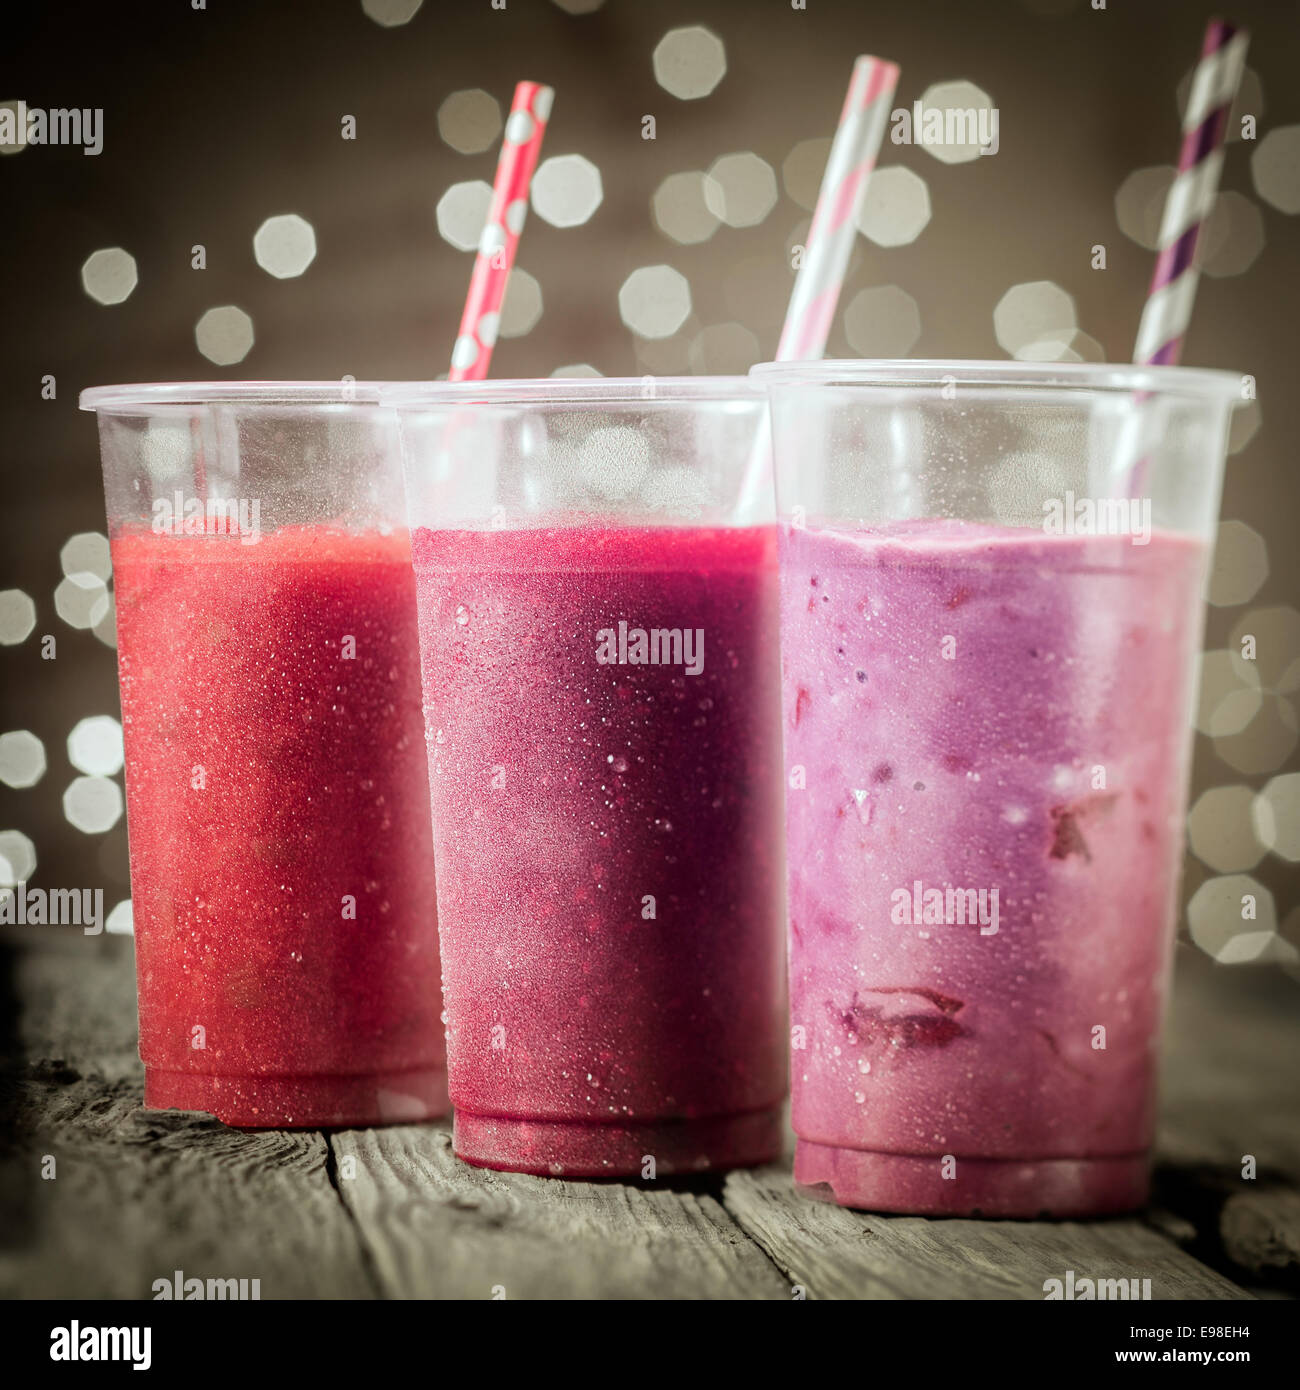 Trio of healthy assorted berry smoothies including strawberry and blueberry blended with yogurt or ice cream standing in a row against a bokeh of party lights Stock Photo